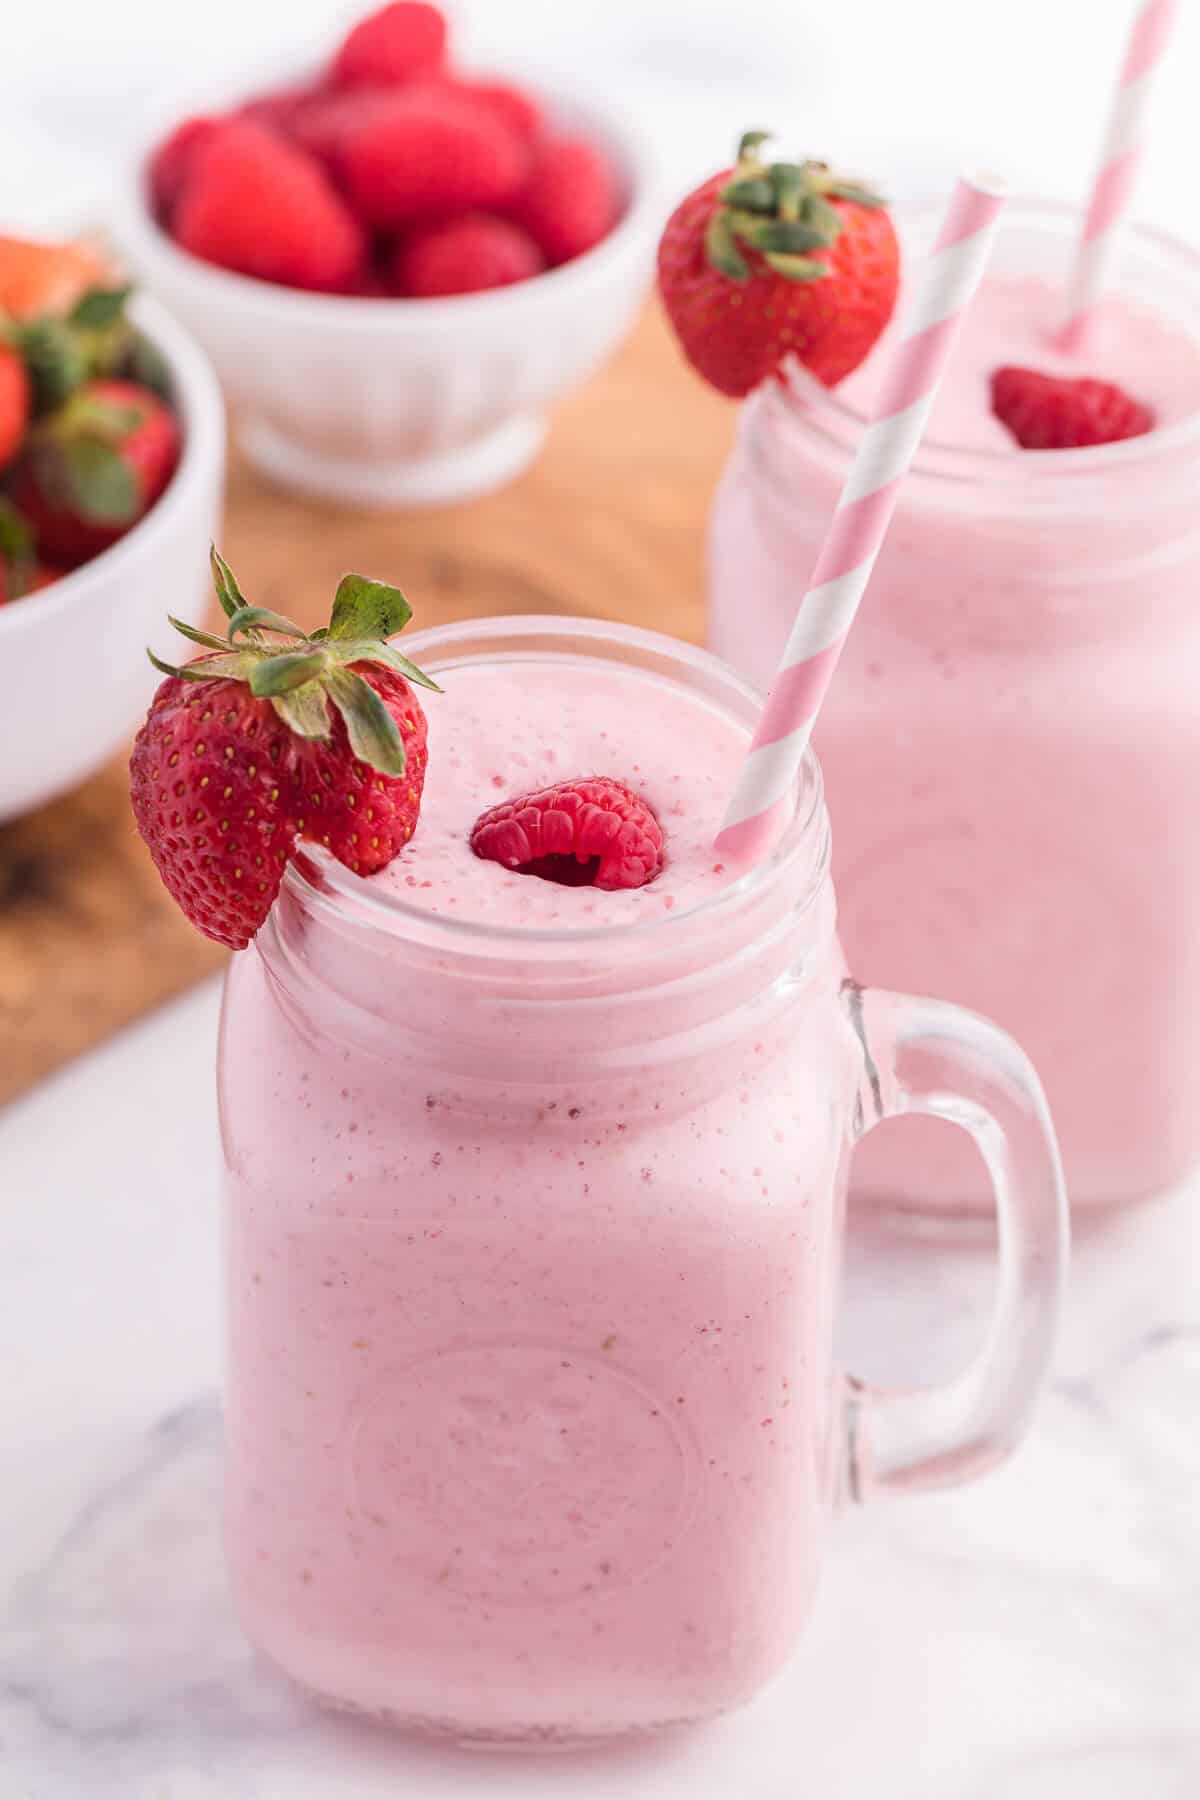 Berry Jam Smoothie - Made with simple ingredients you're likely to have on hand like yogurt, milk and jam, you can make this quick "berry"-licious smoothie in no time at all!